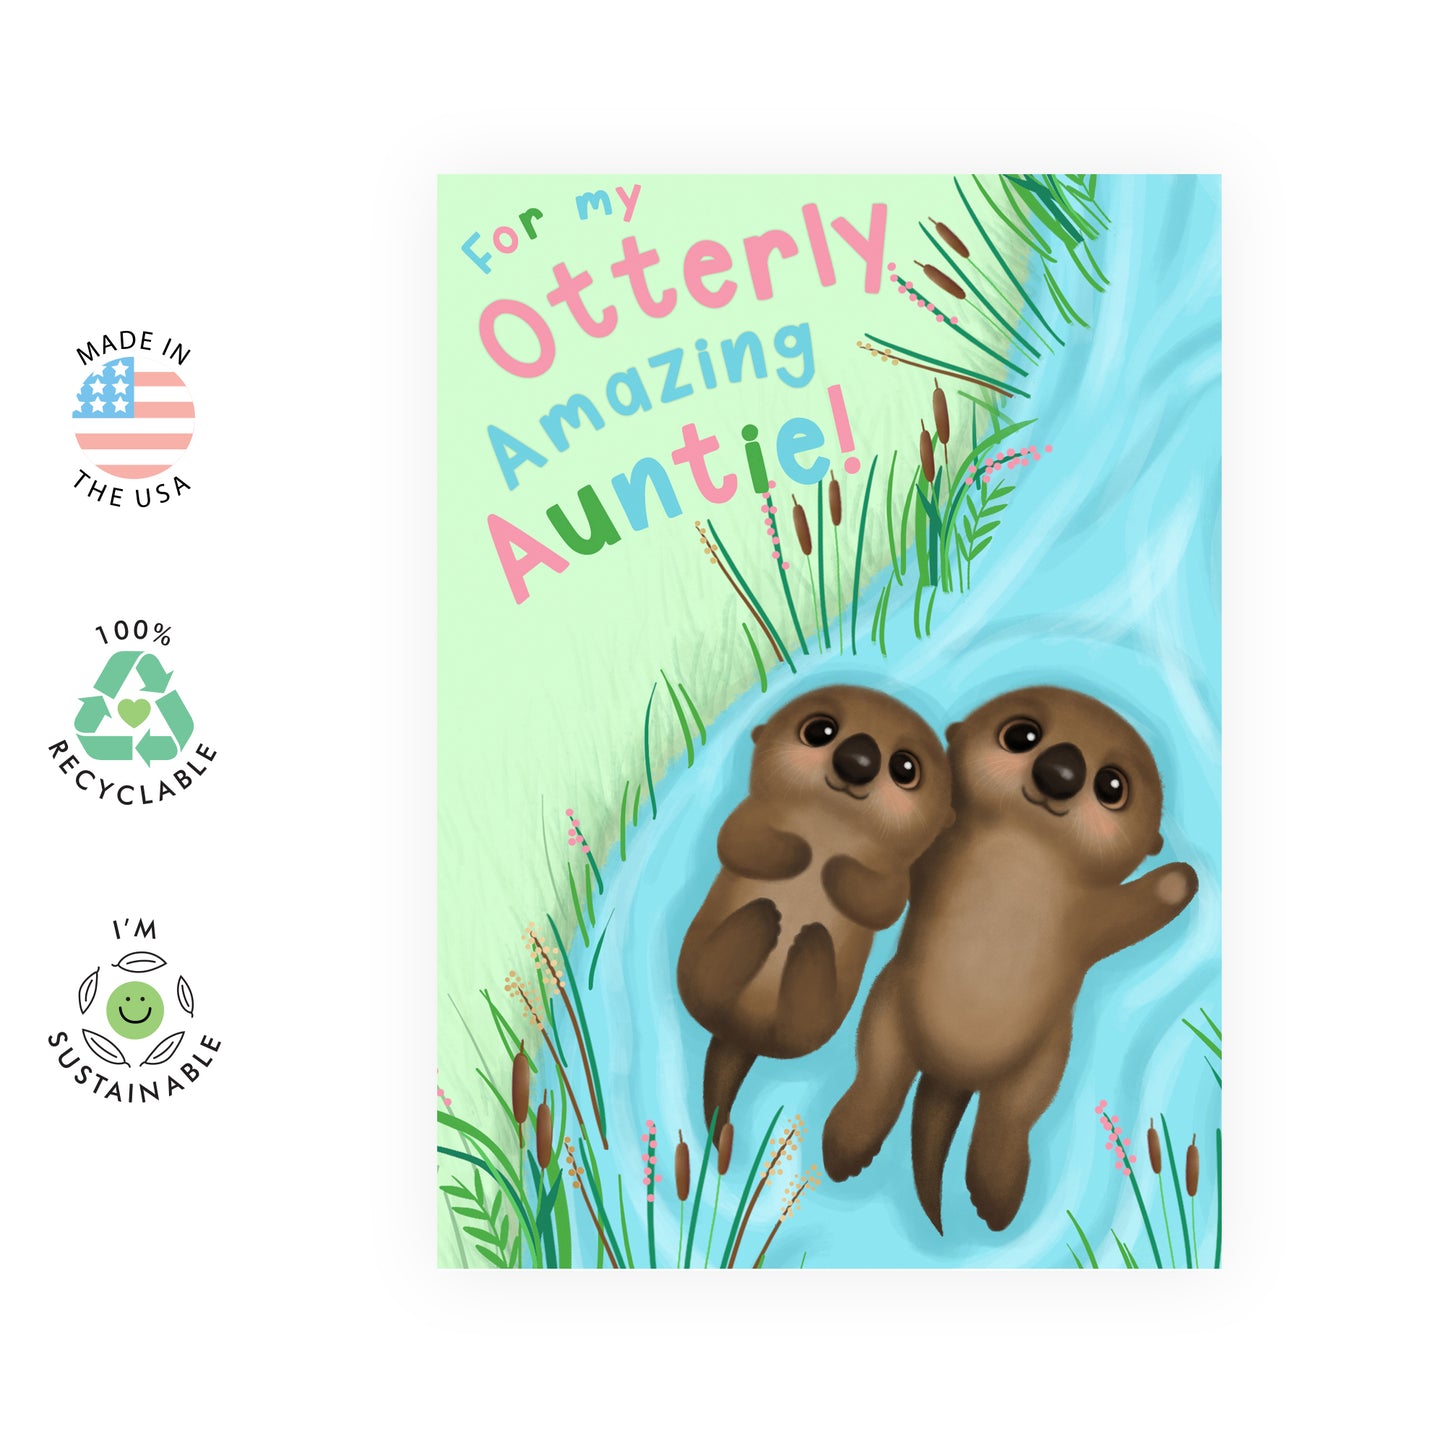 Otter Birthday Card - Otterly Amazing Auntie - For Aunt Women Her